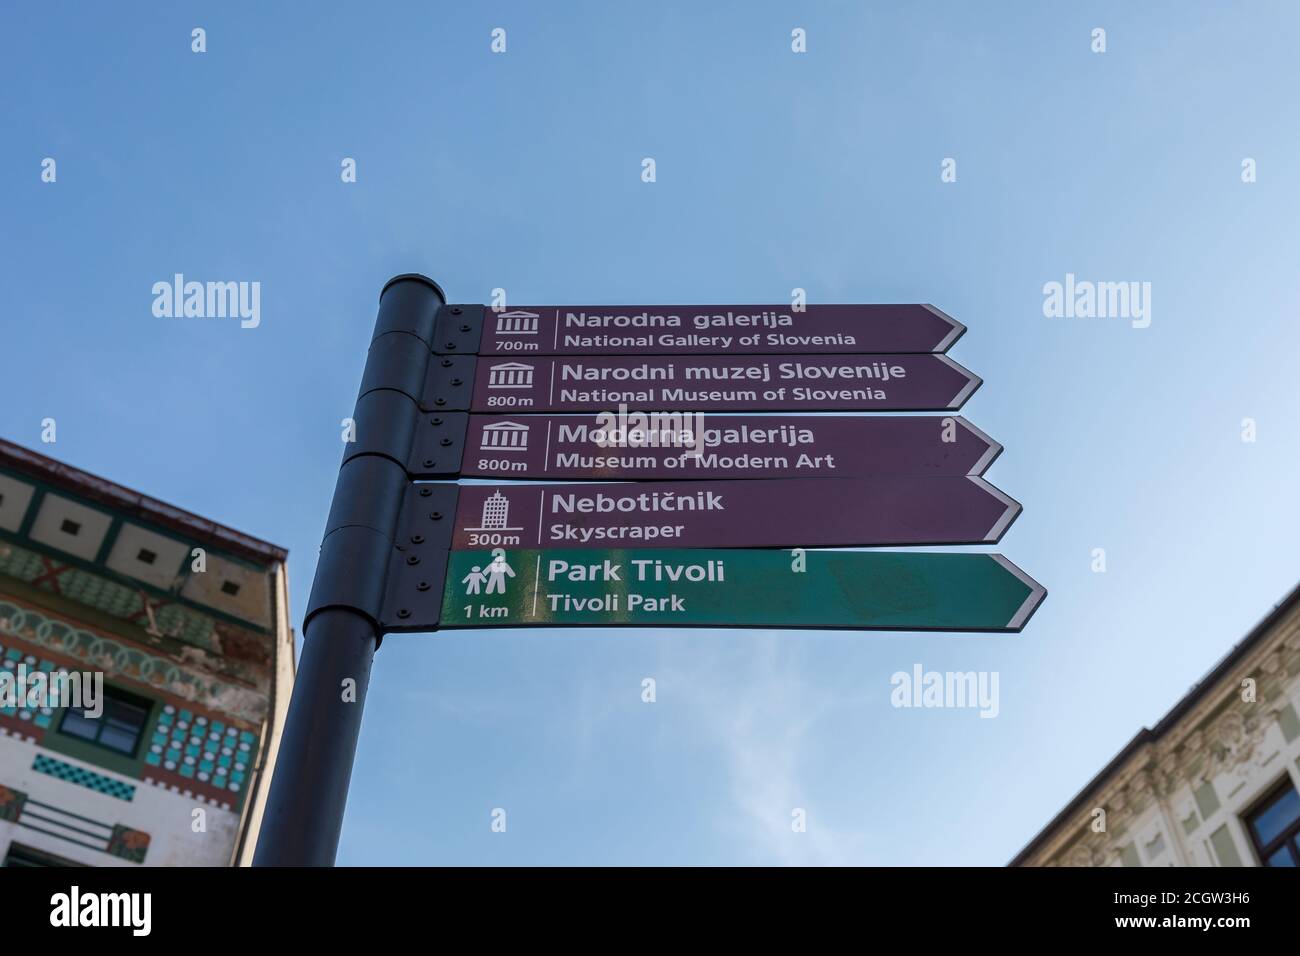 Signpost showing directions to the points of interest and landmarks in Ljubljana, Slovenia Stock Photo